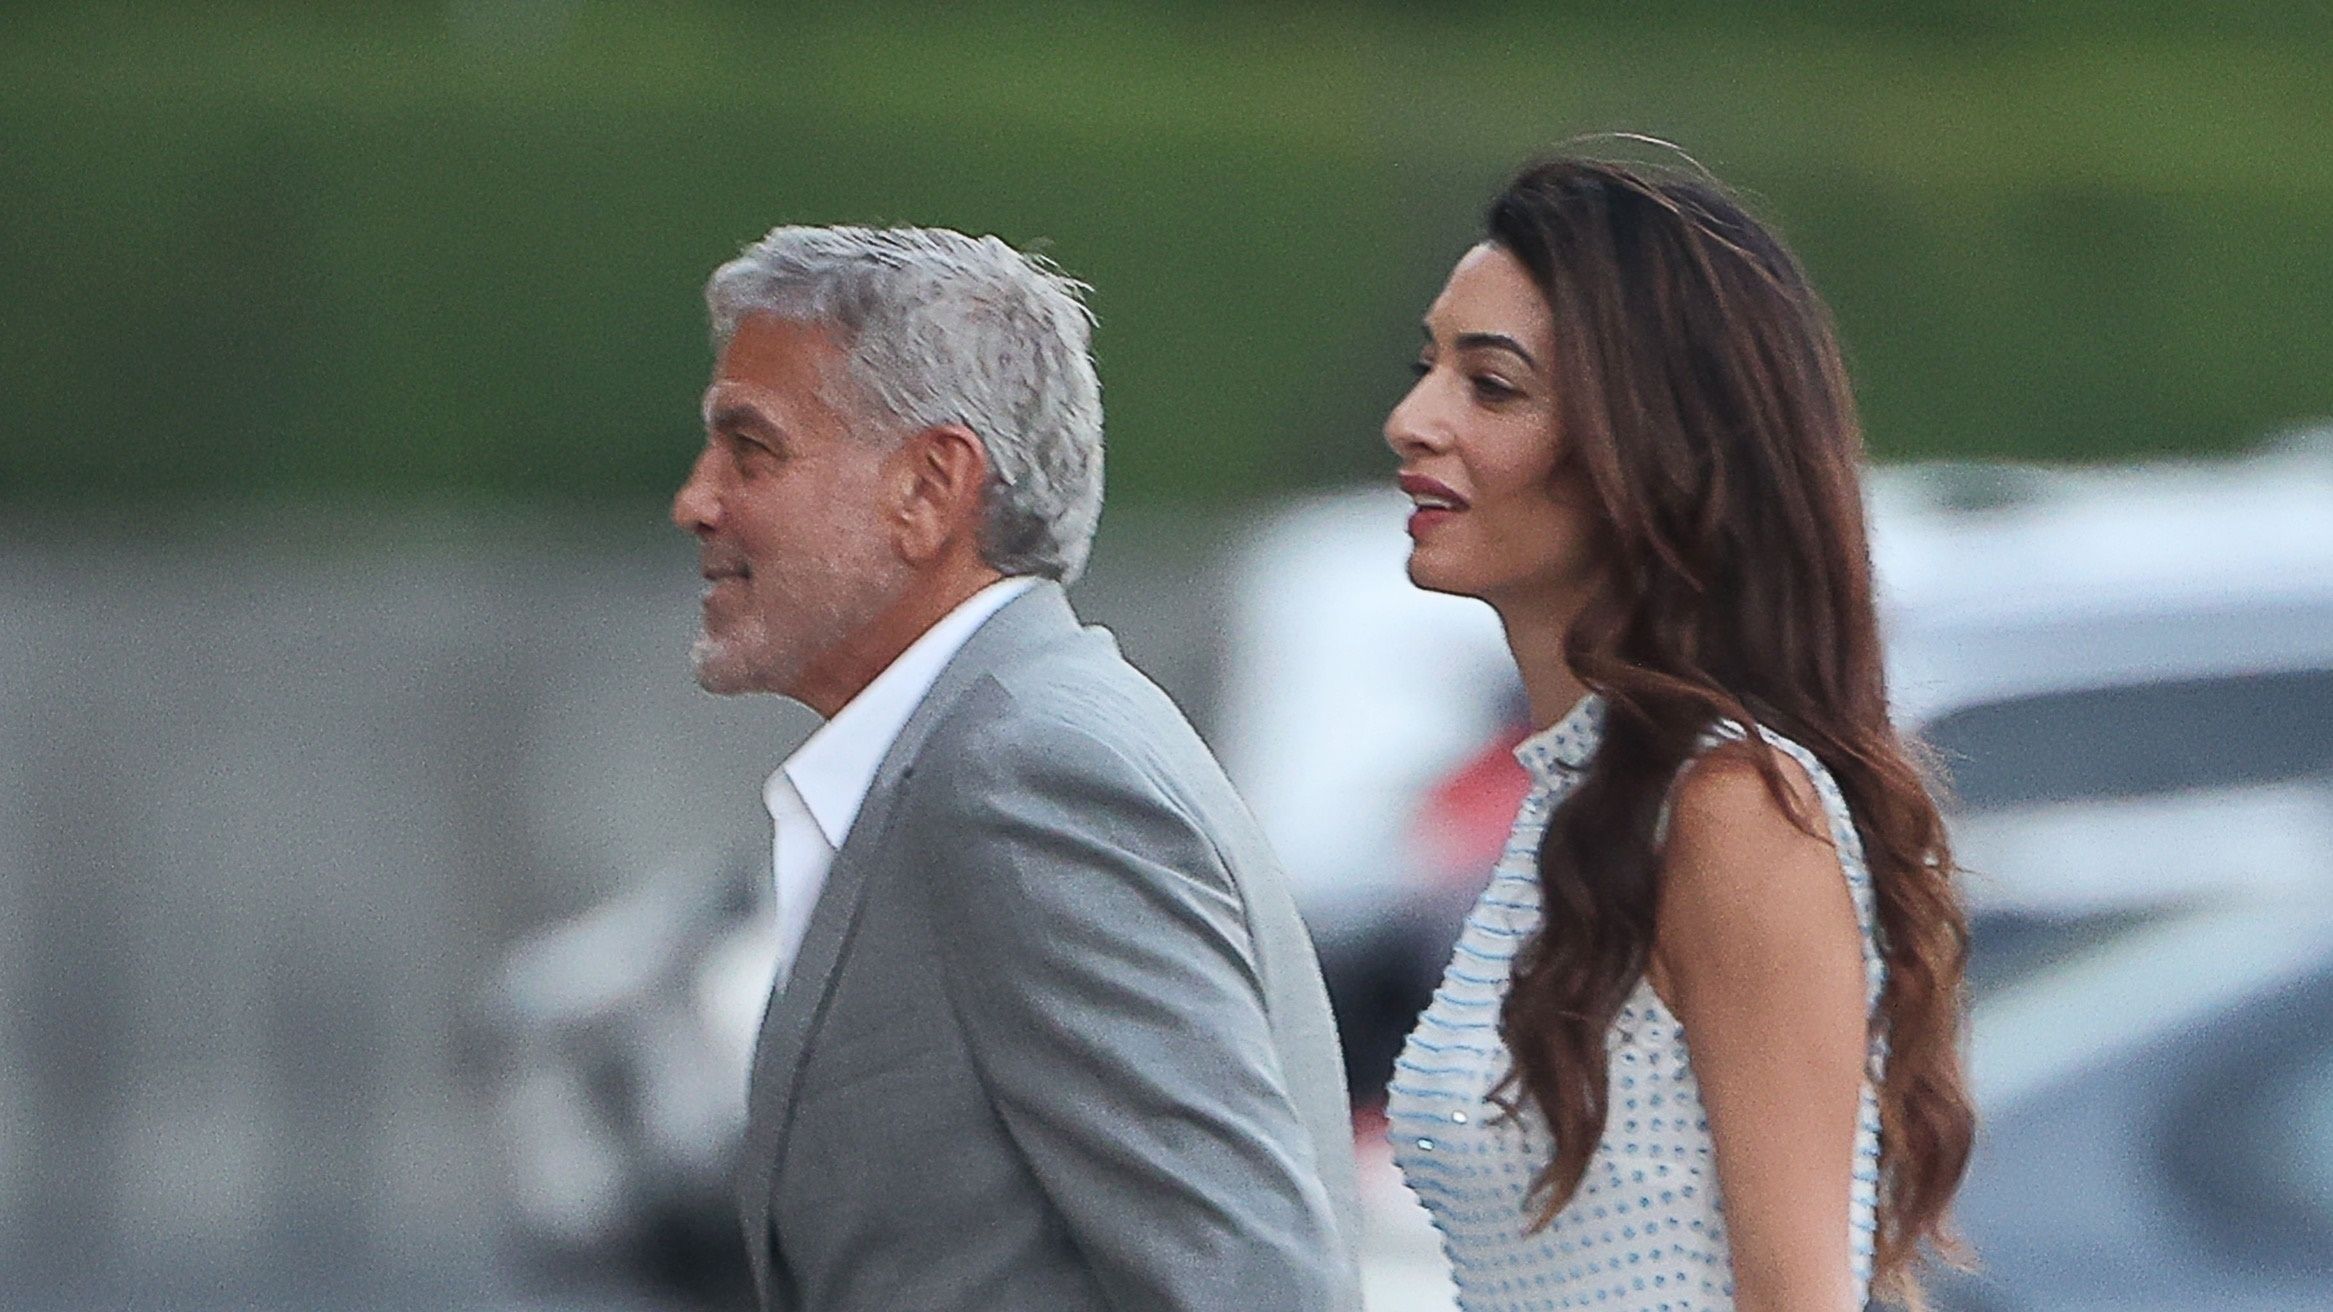 Amaland Porn - Amal Clooney wears feathered mini dress while out in Lake Como